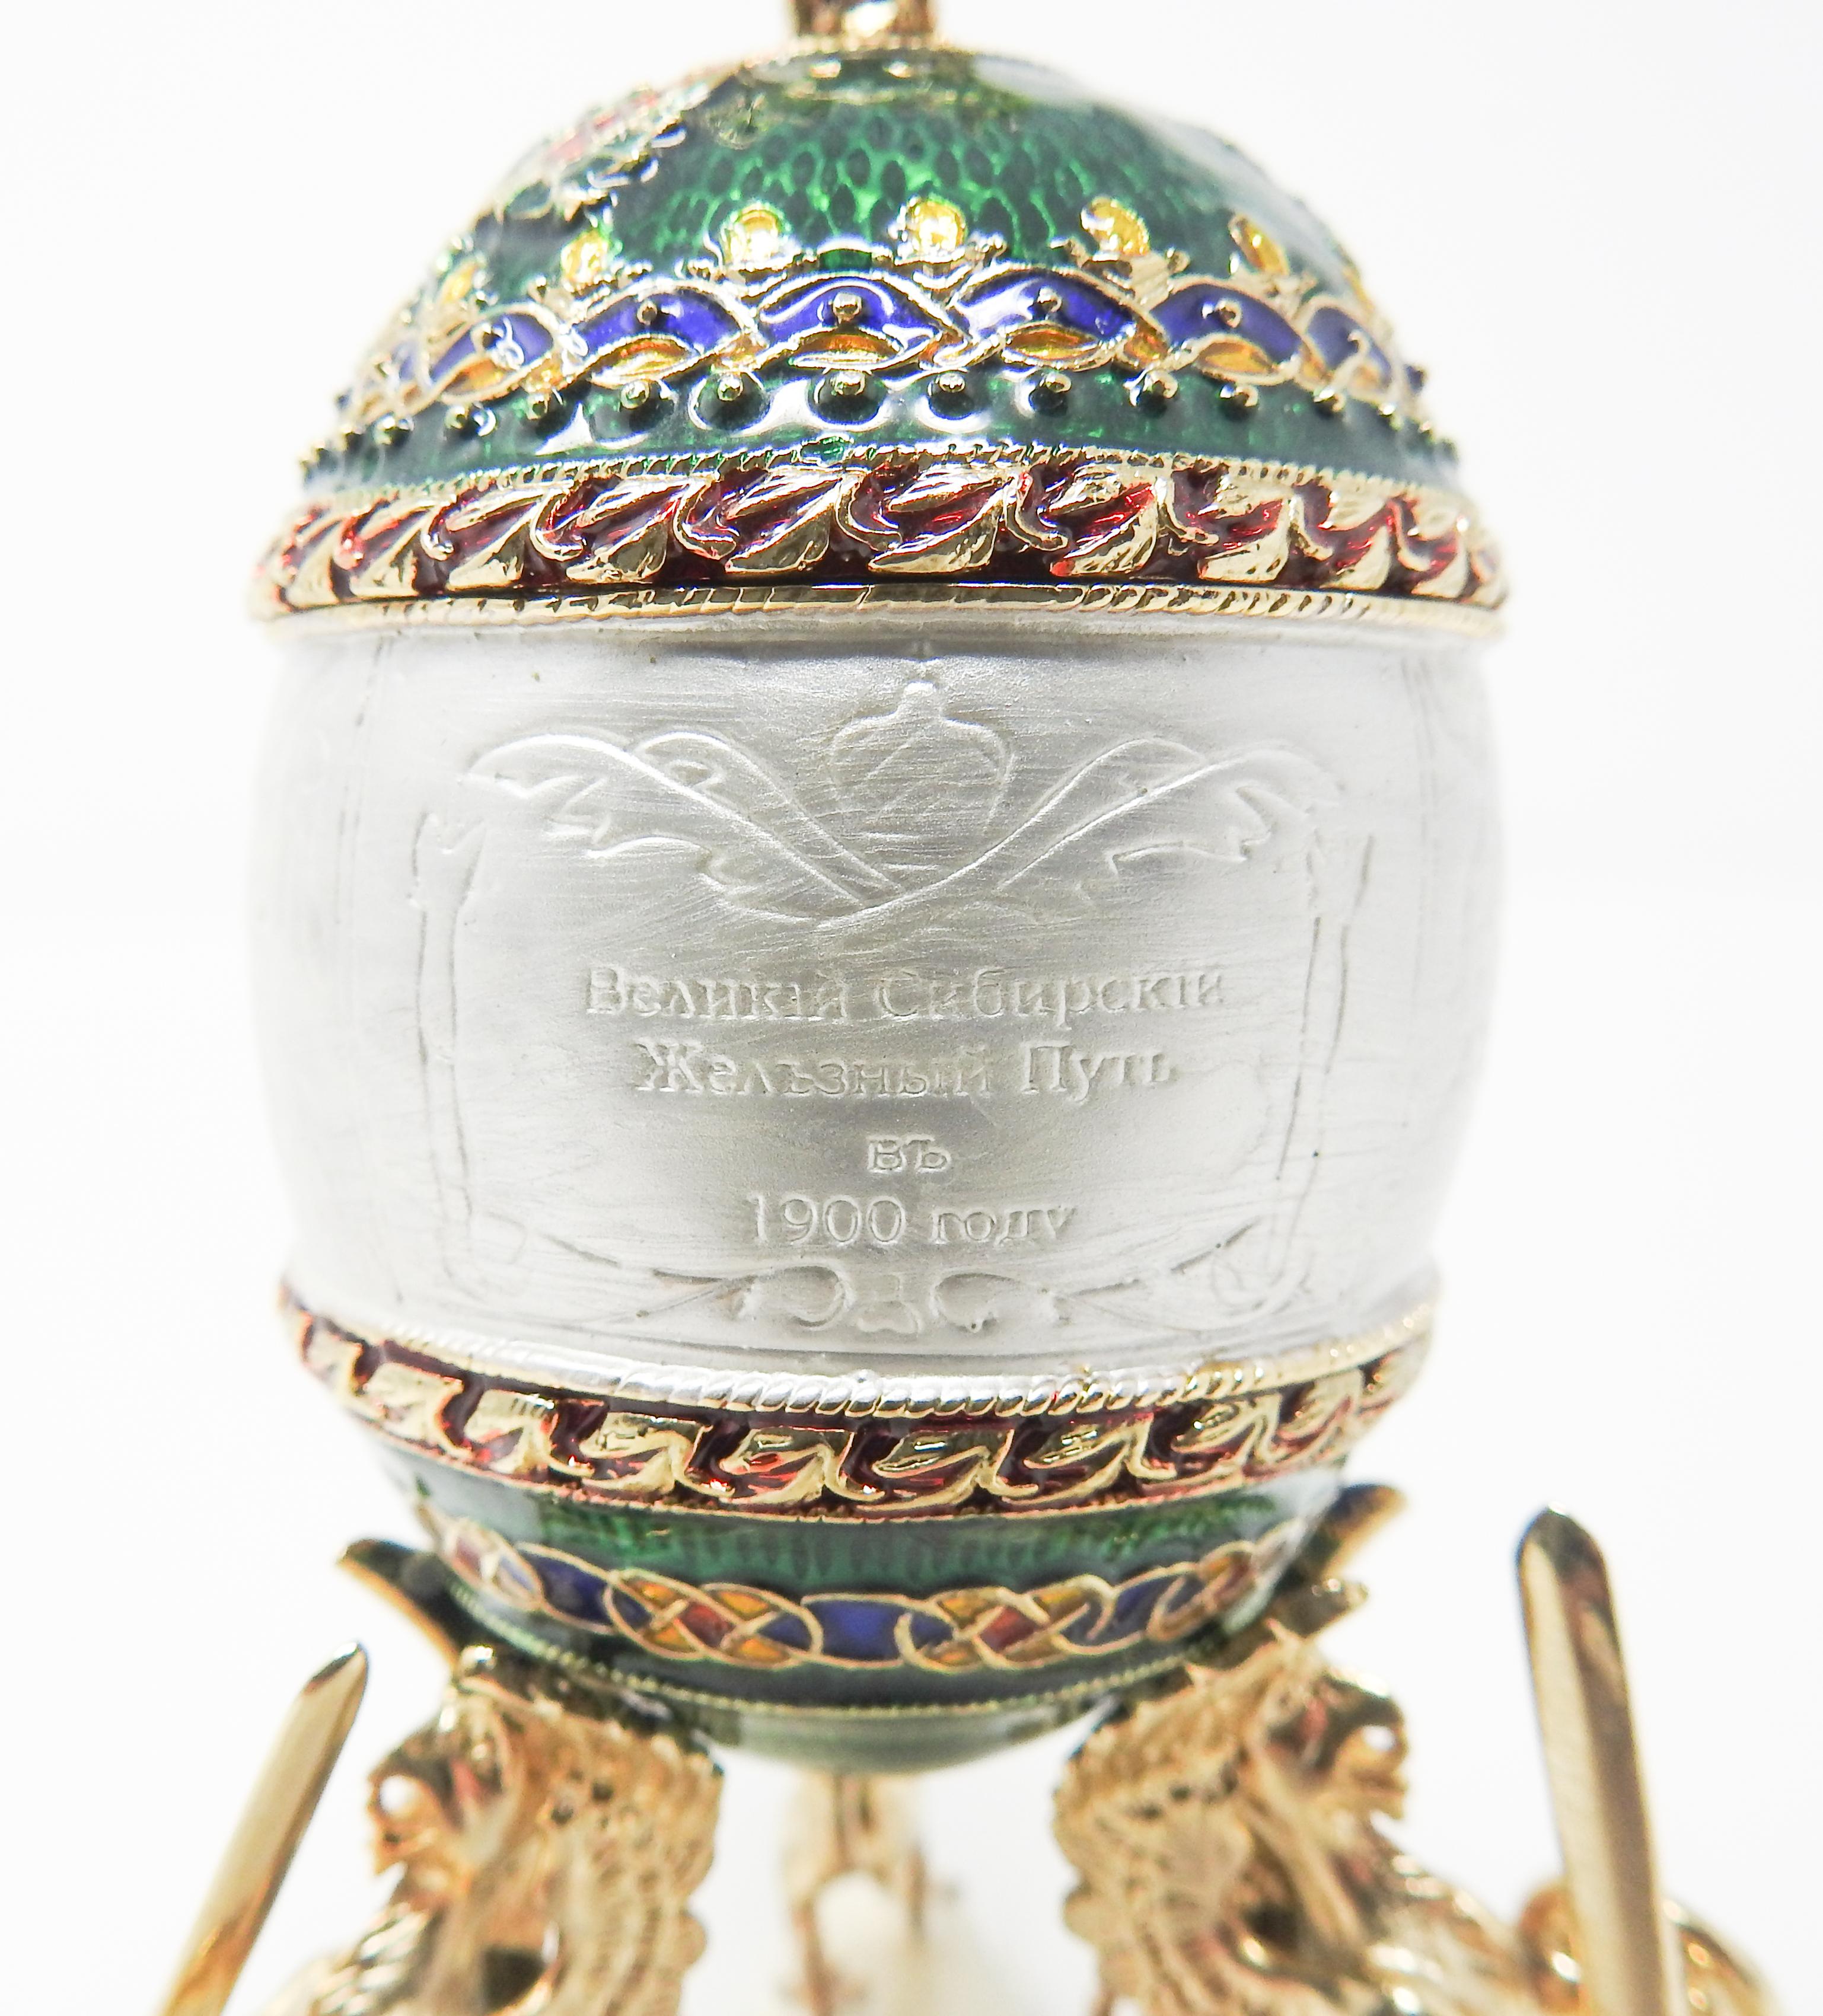 how much does a faberge egg cost